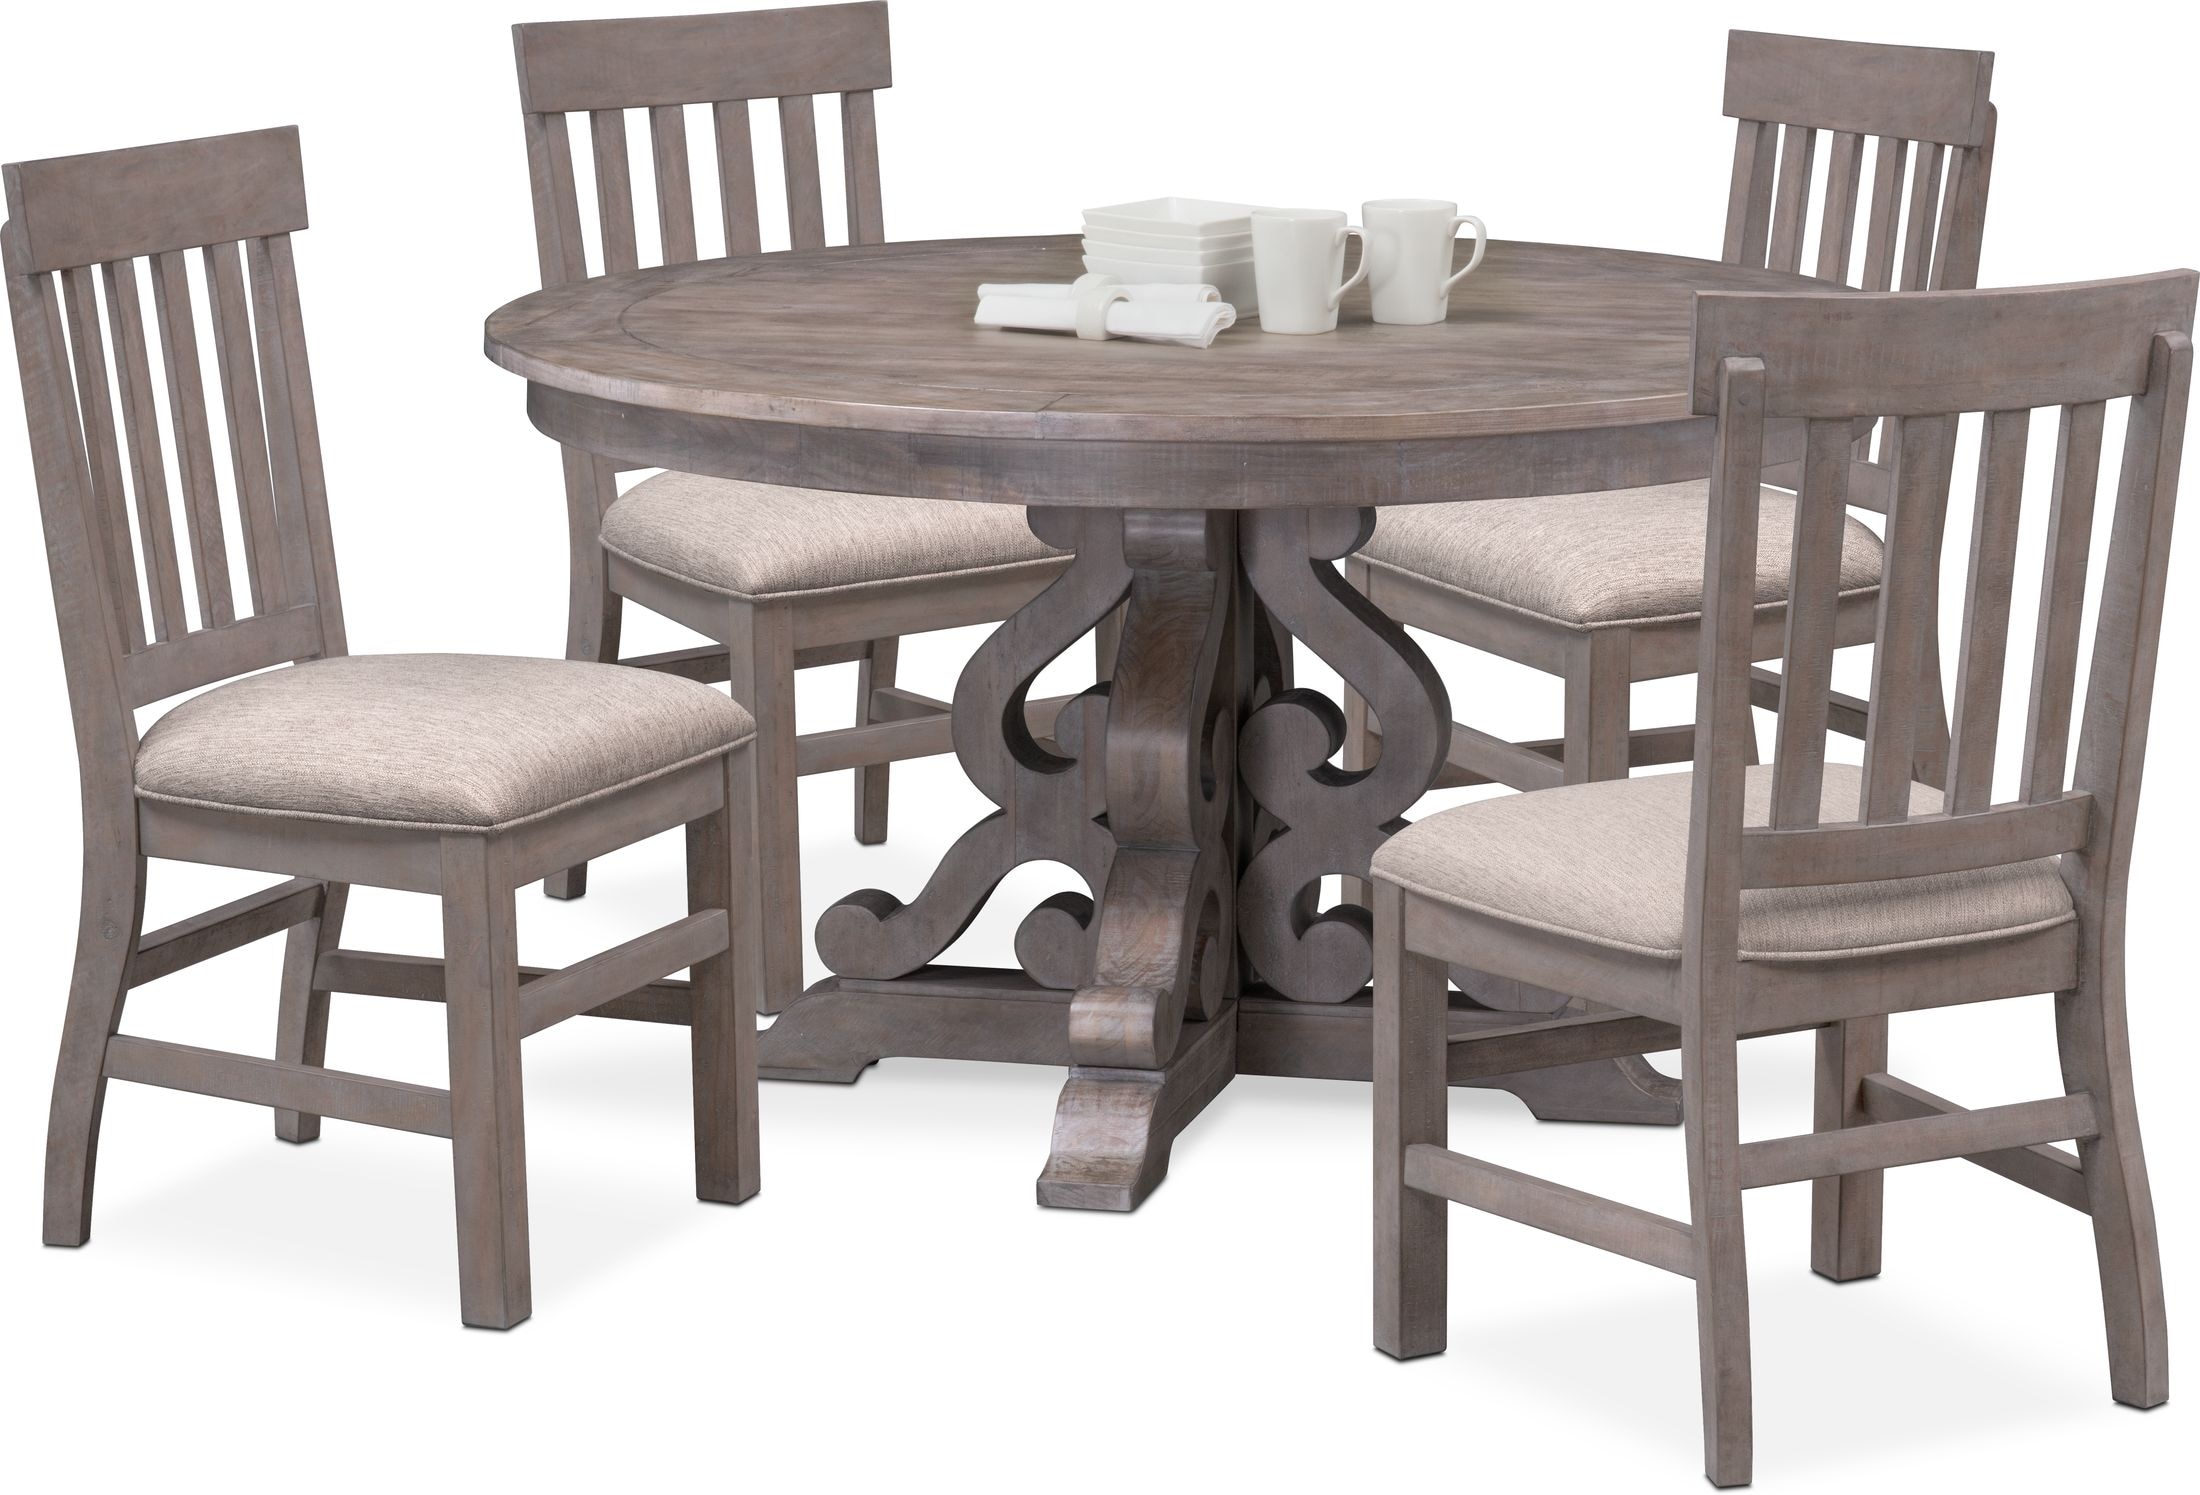 Undefined Value City Furniture, Round Kitchen Table Sets With Leaf